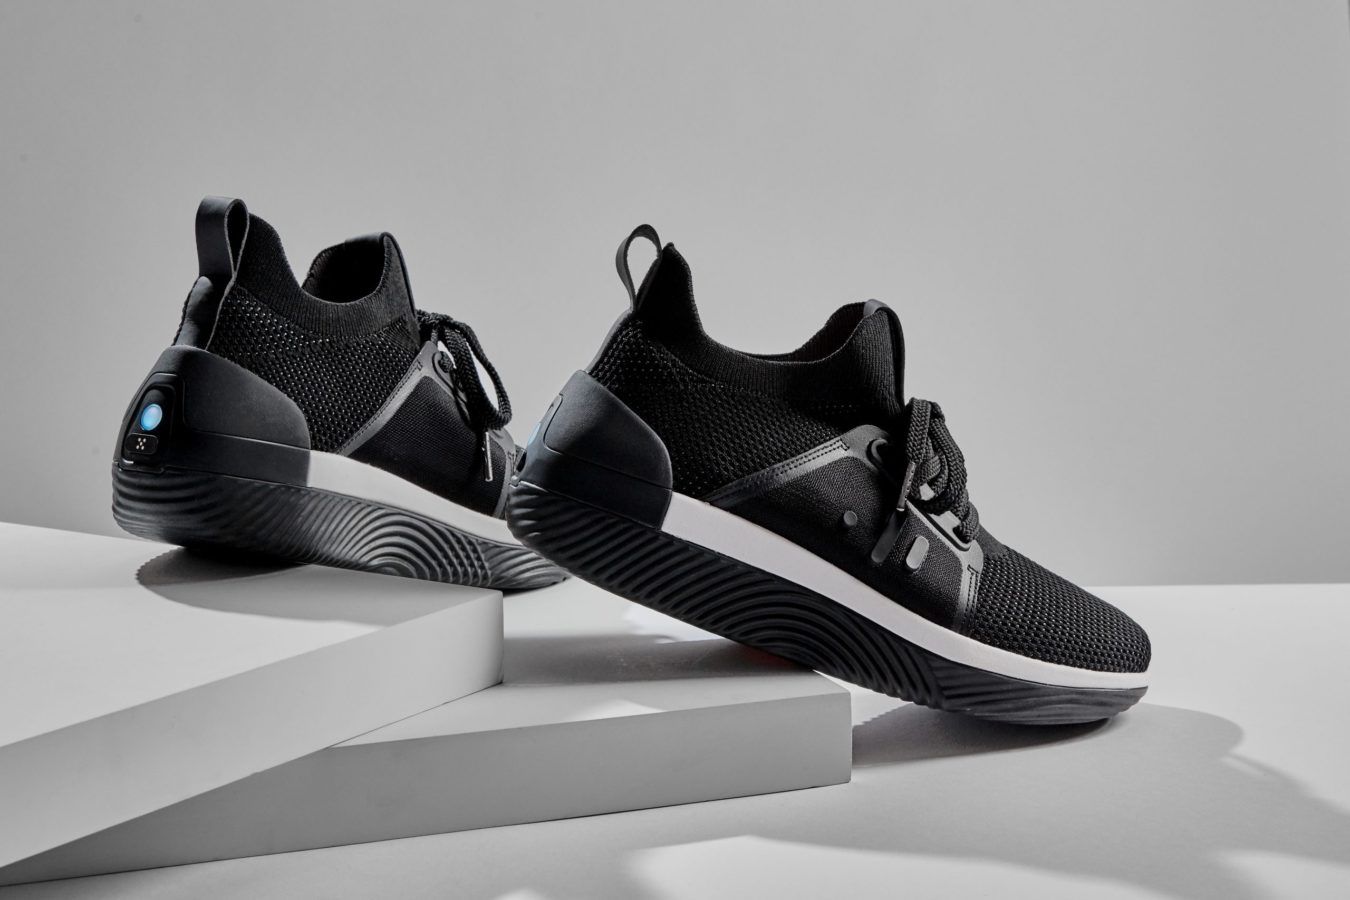 Walk to the beat with these sneakers that vibrate to the rhythm of music